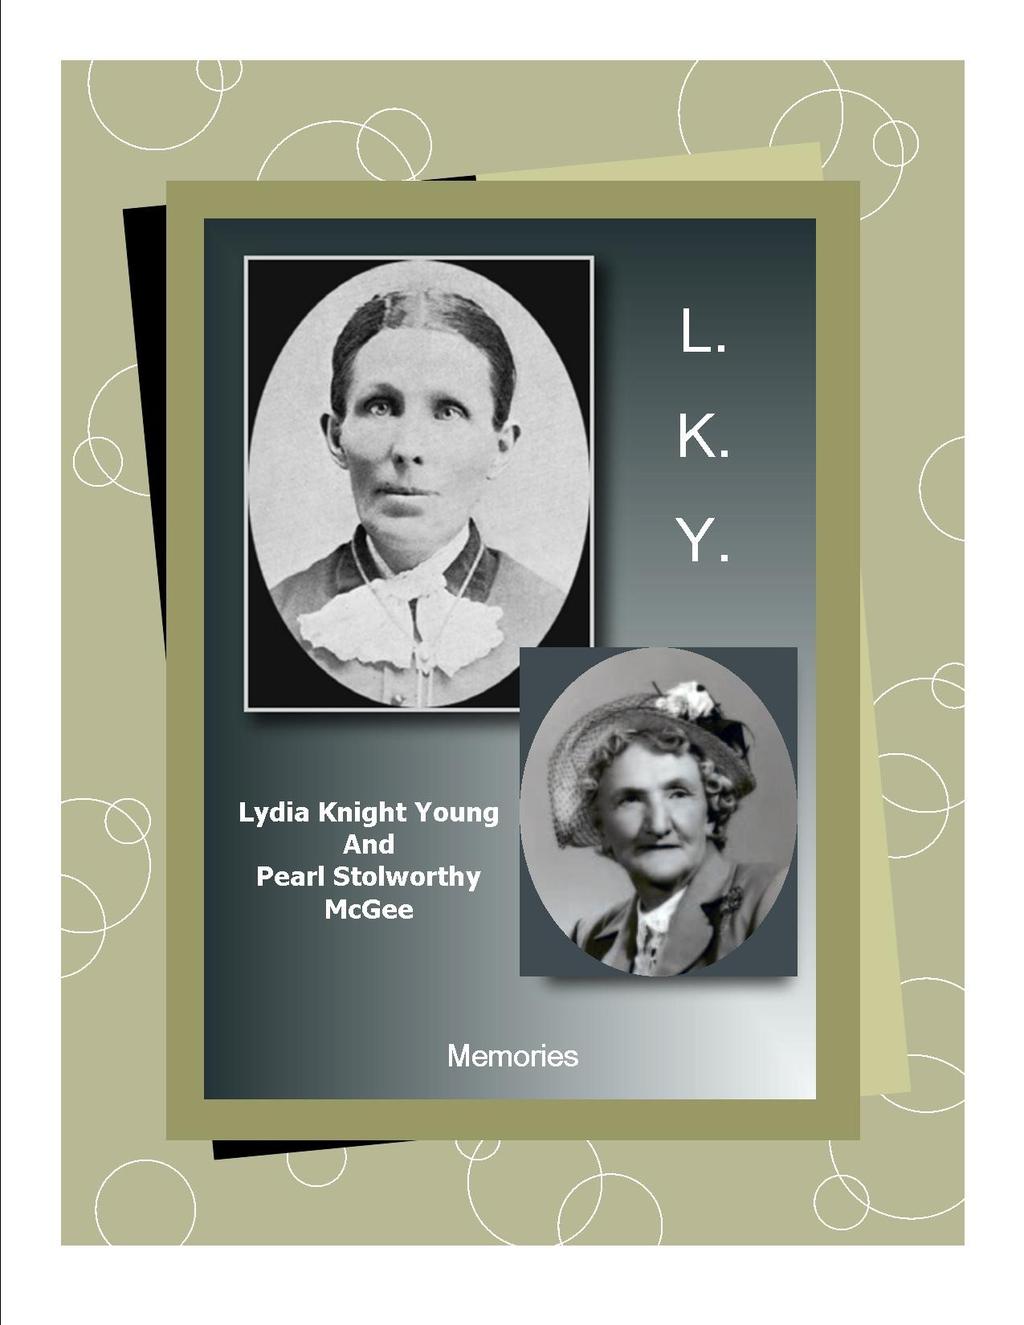 HISTORY OF LYDIA KNIGHT YOUNG By Pearl McGee 1 My Grandmother, Lydia Knight Young, was born of noble parentage, Newel Knight and Lydia Goldthwaite Knight.